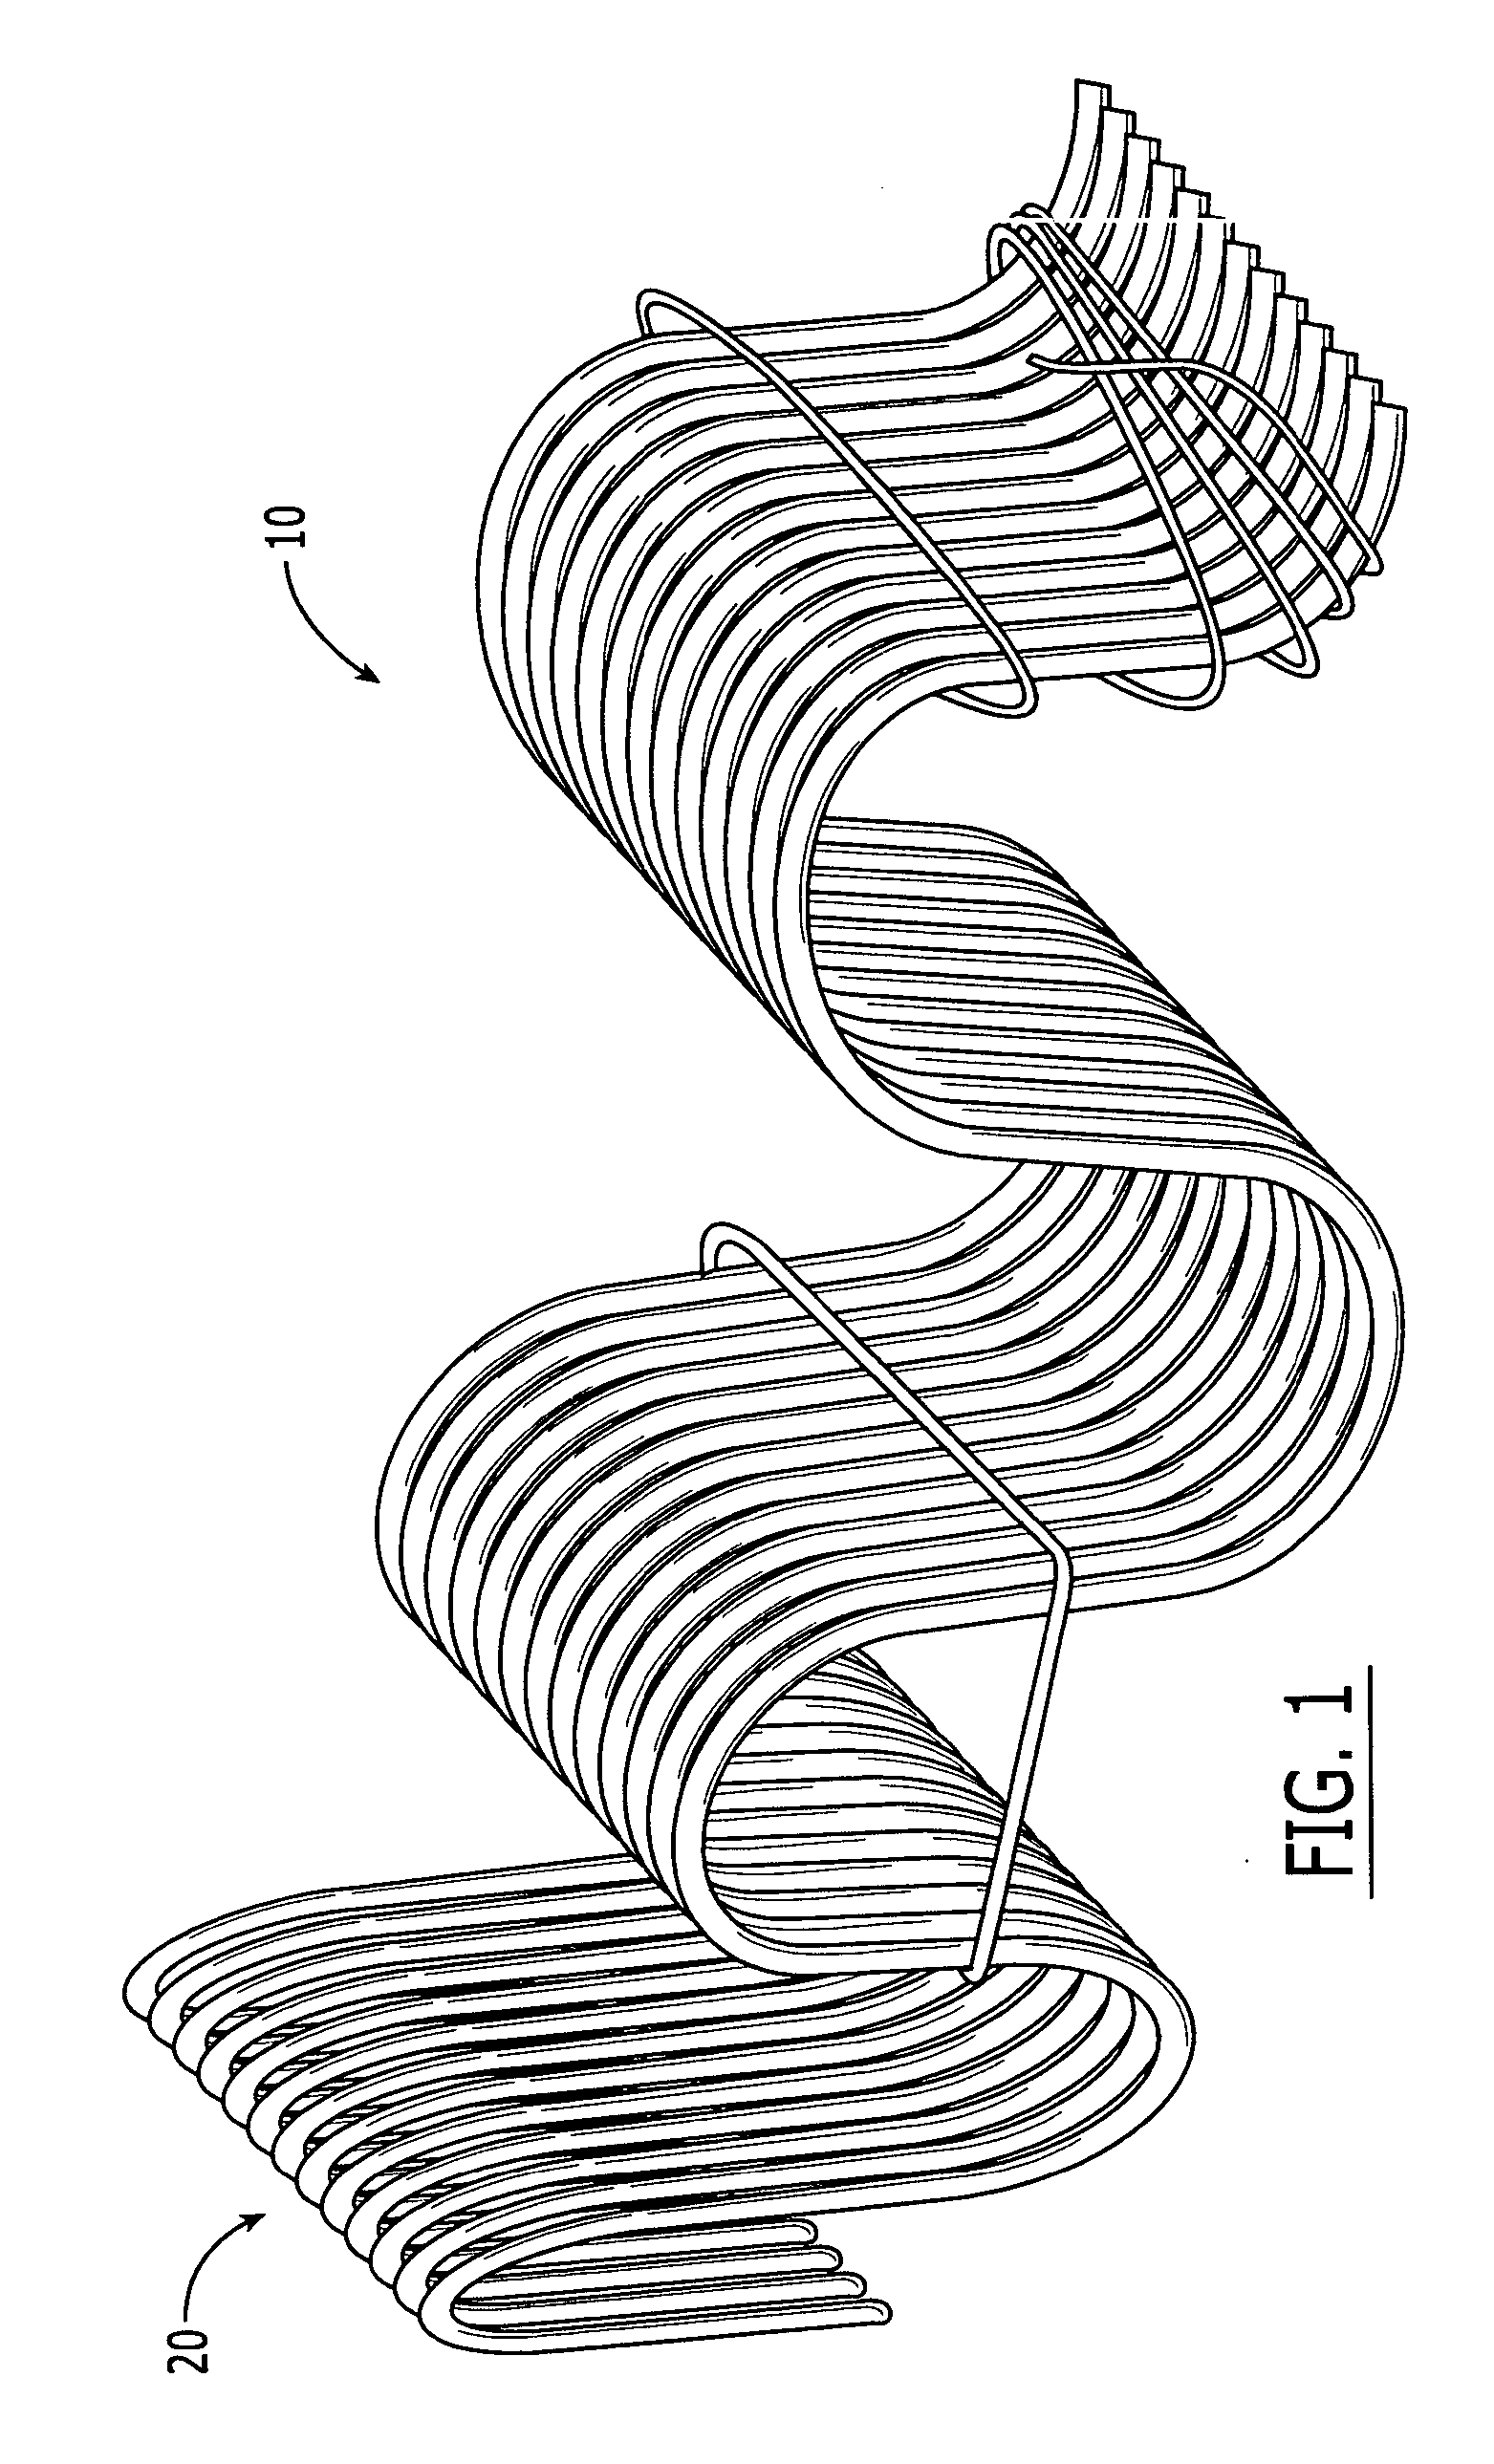 Clamping clip for bundled sinuous wire